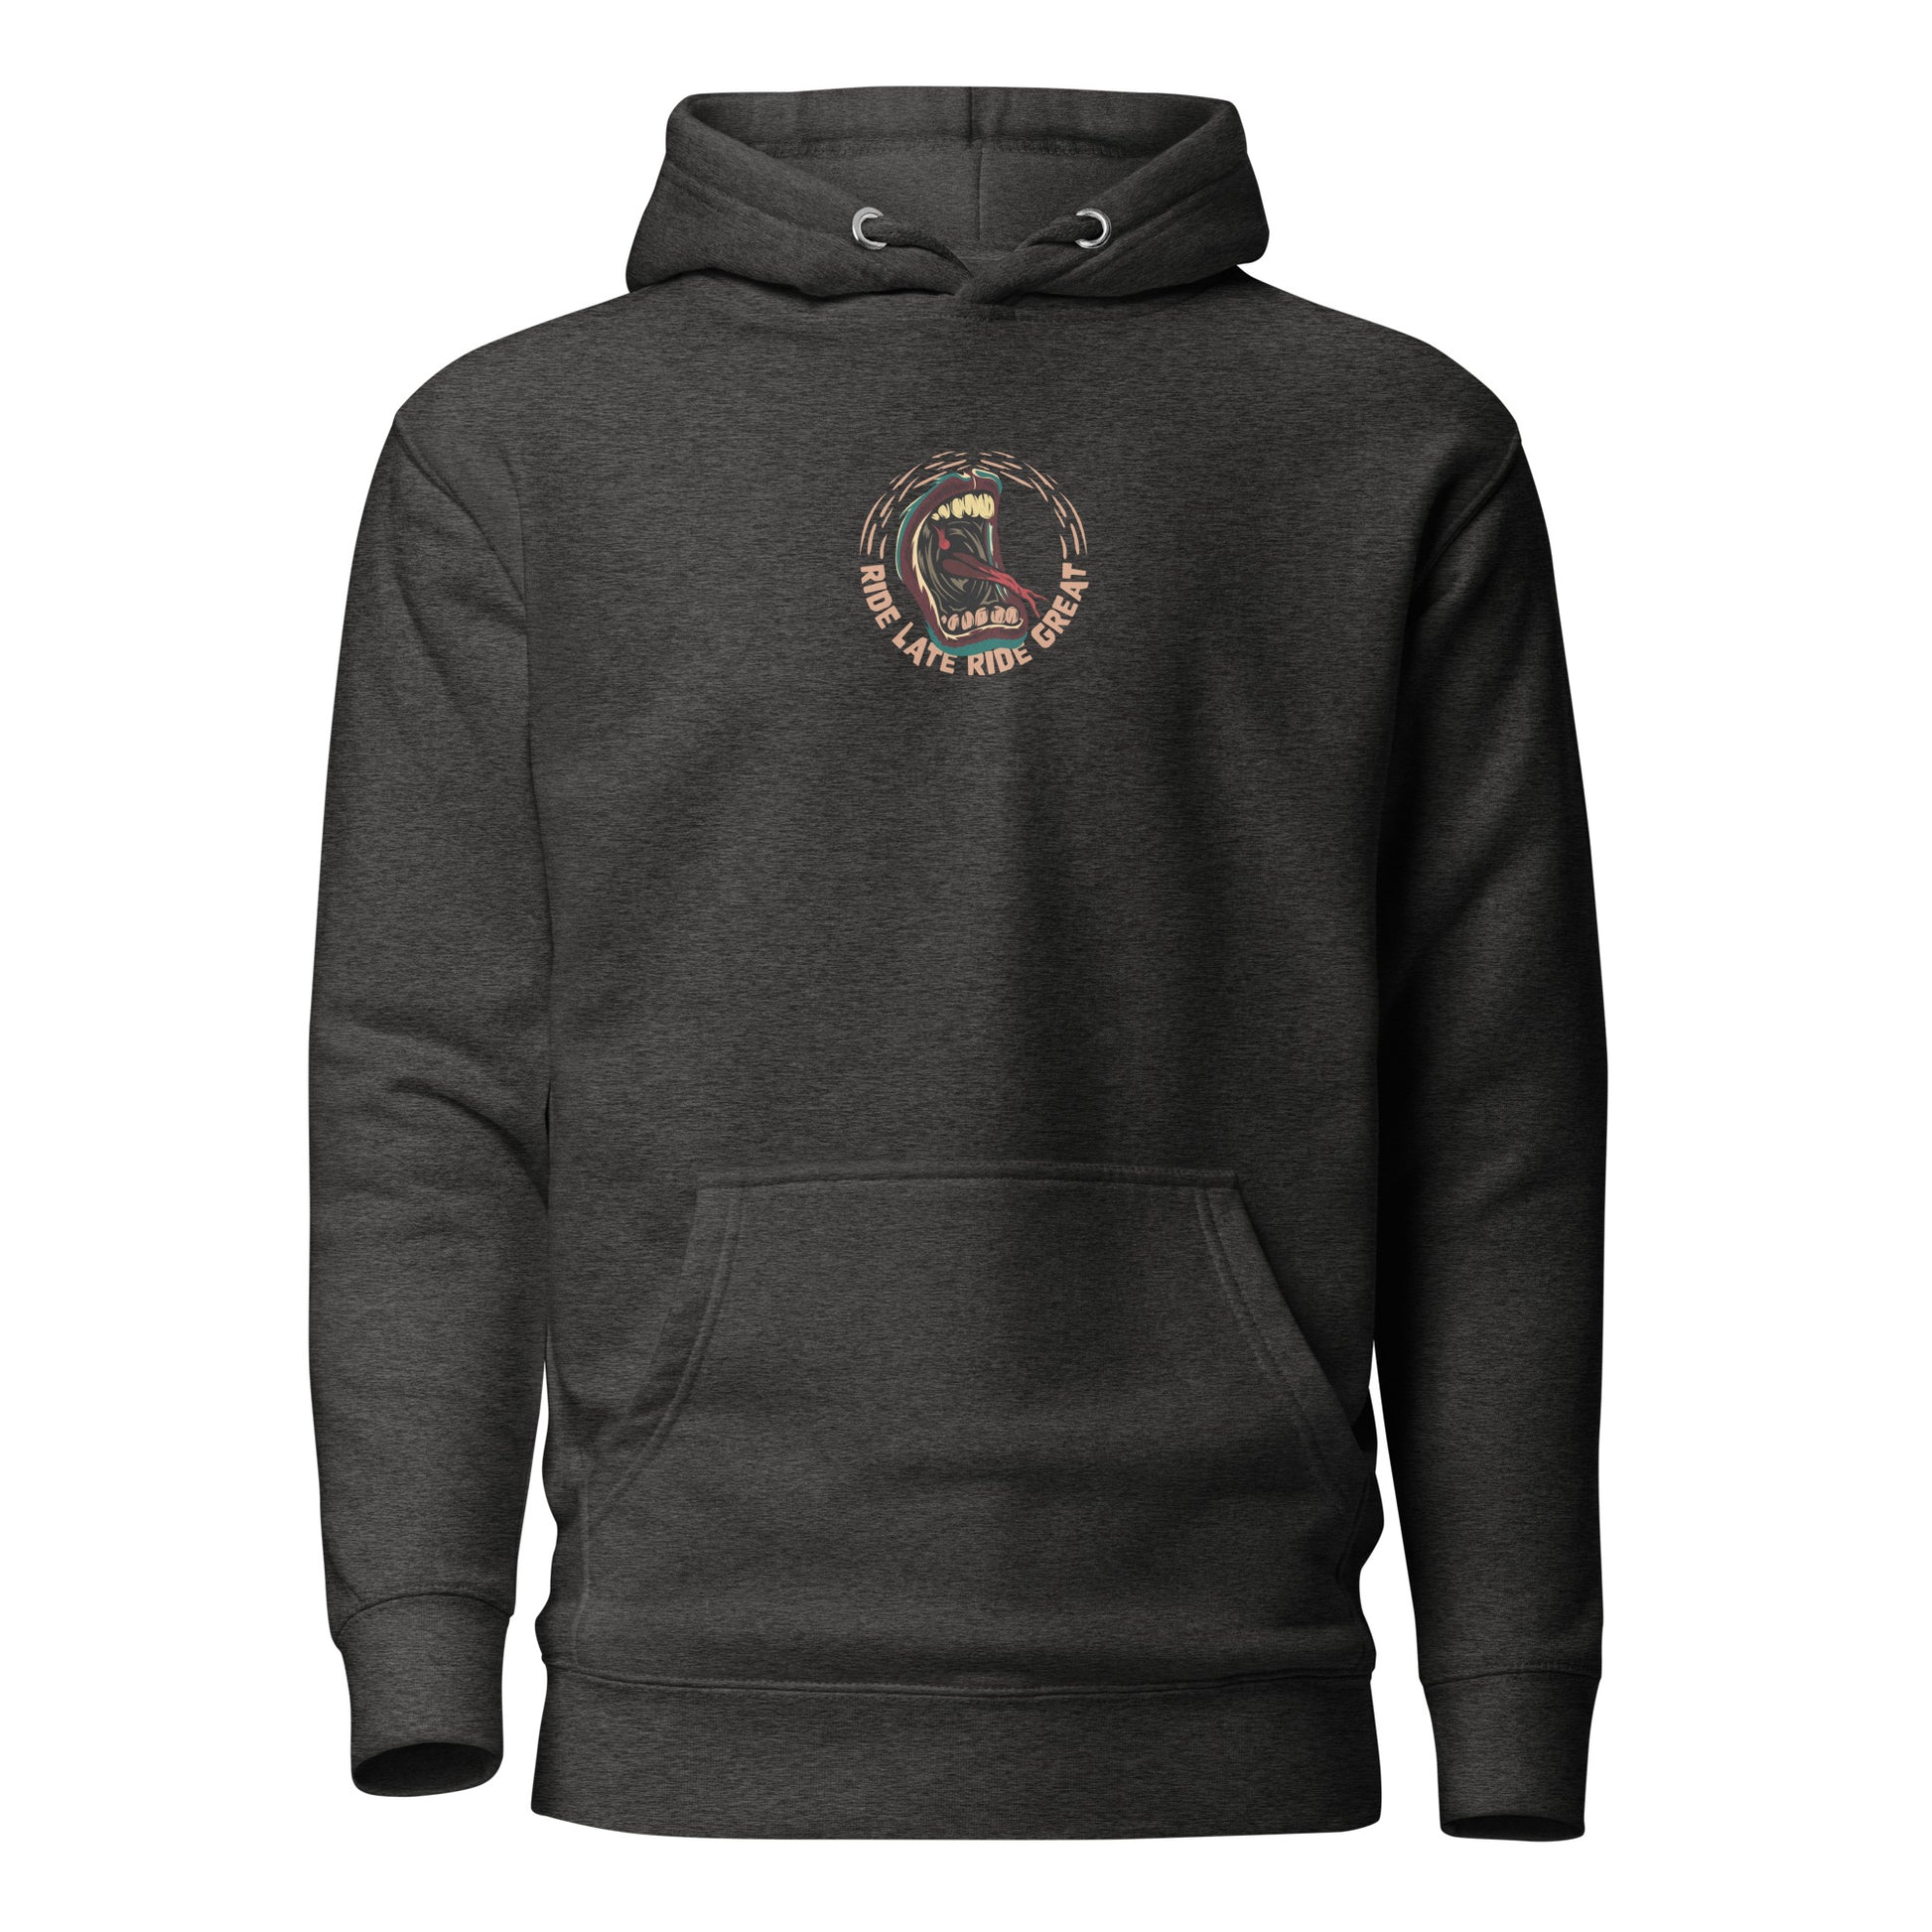 Hoodie charcoal heather face unisex Ride Late Live Great design bouche hurle style santa cruz surfing